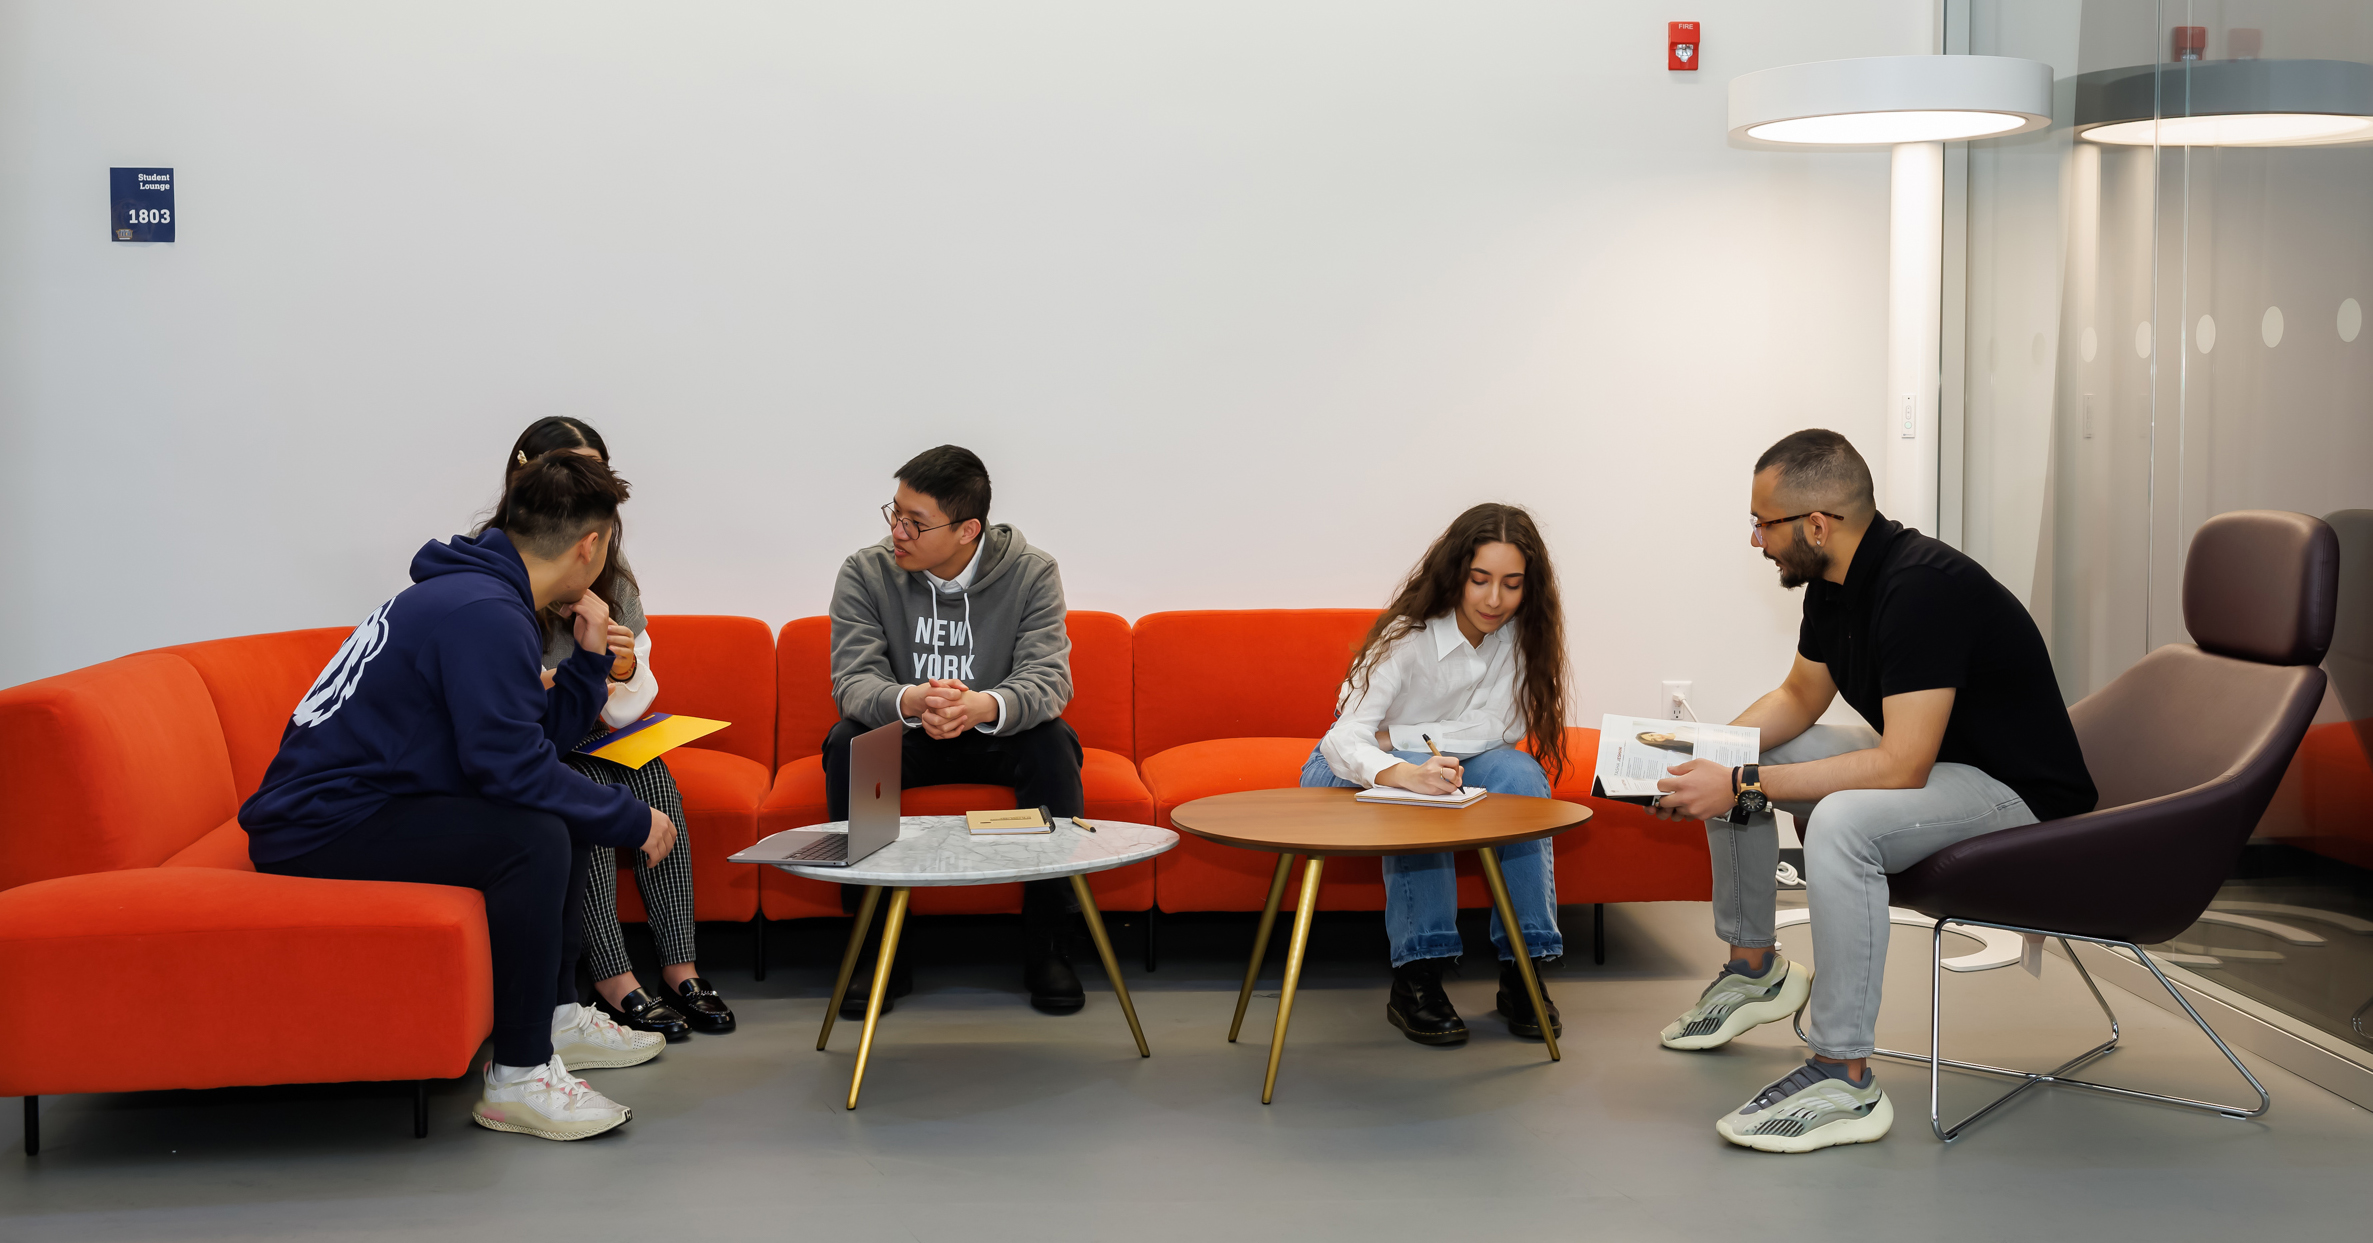 The new spaces feature vibrant colors and include student lounges, plenty of natural light to show off views of the surrounding trees, large classrooms equipped with state-of-the- art technology, and a new green screen studio, among other improvements.